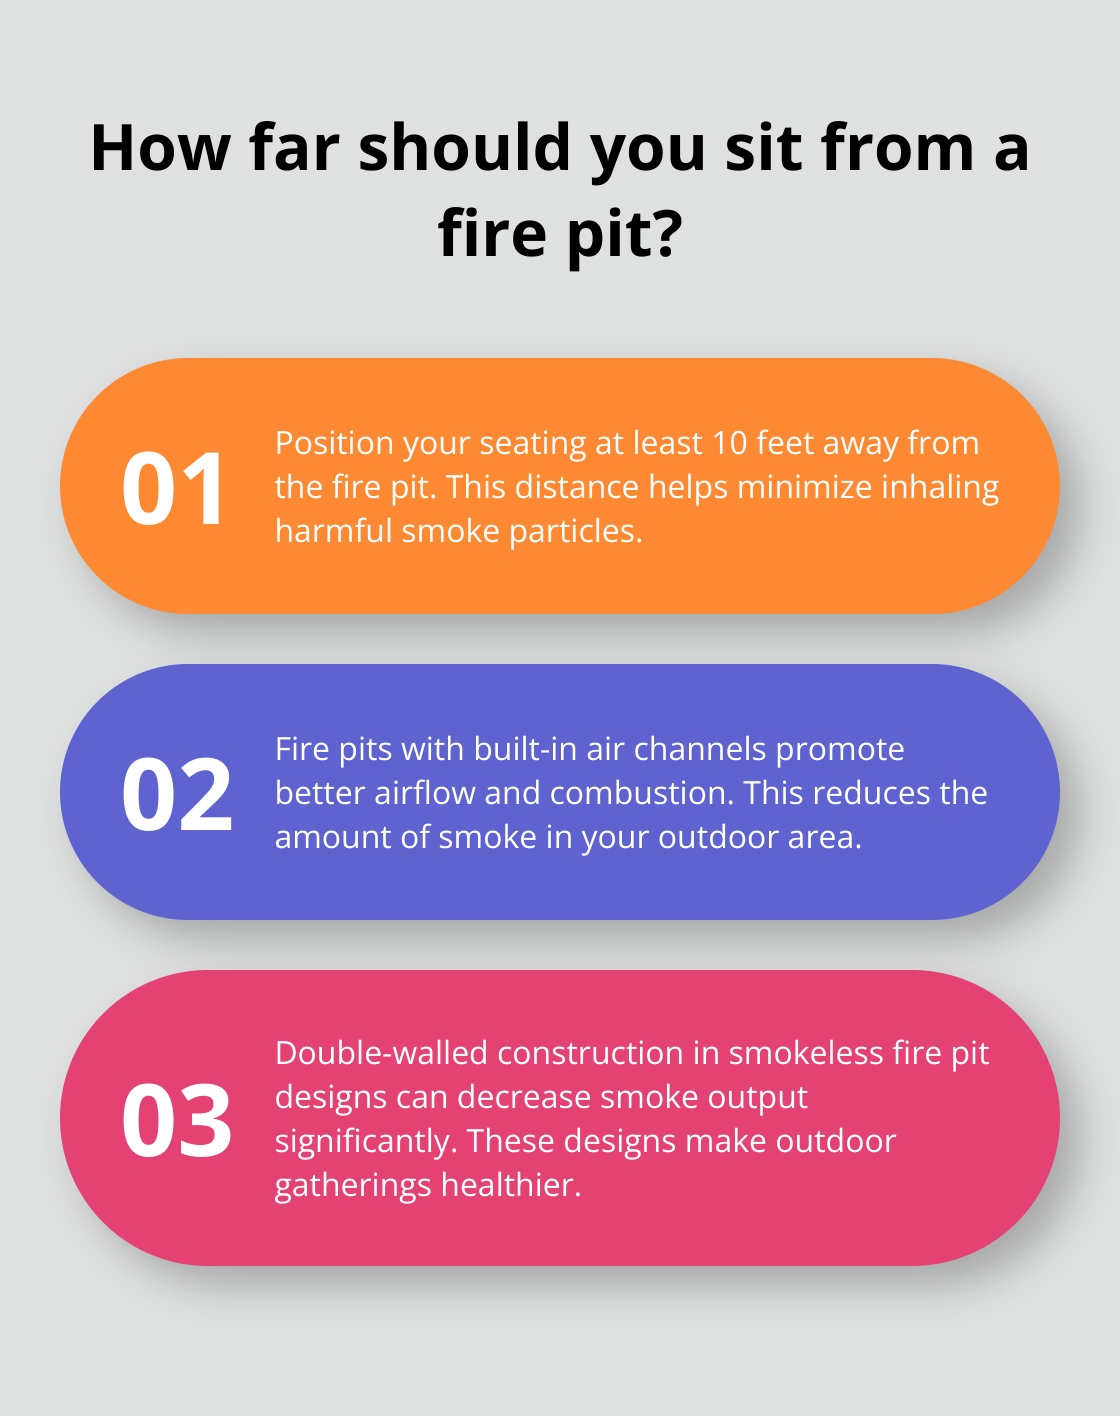 Fact - How far should you sit from a fire pit?